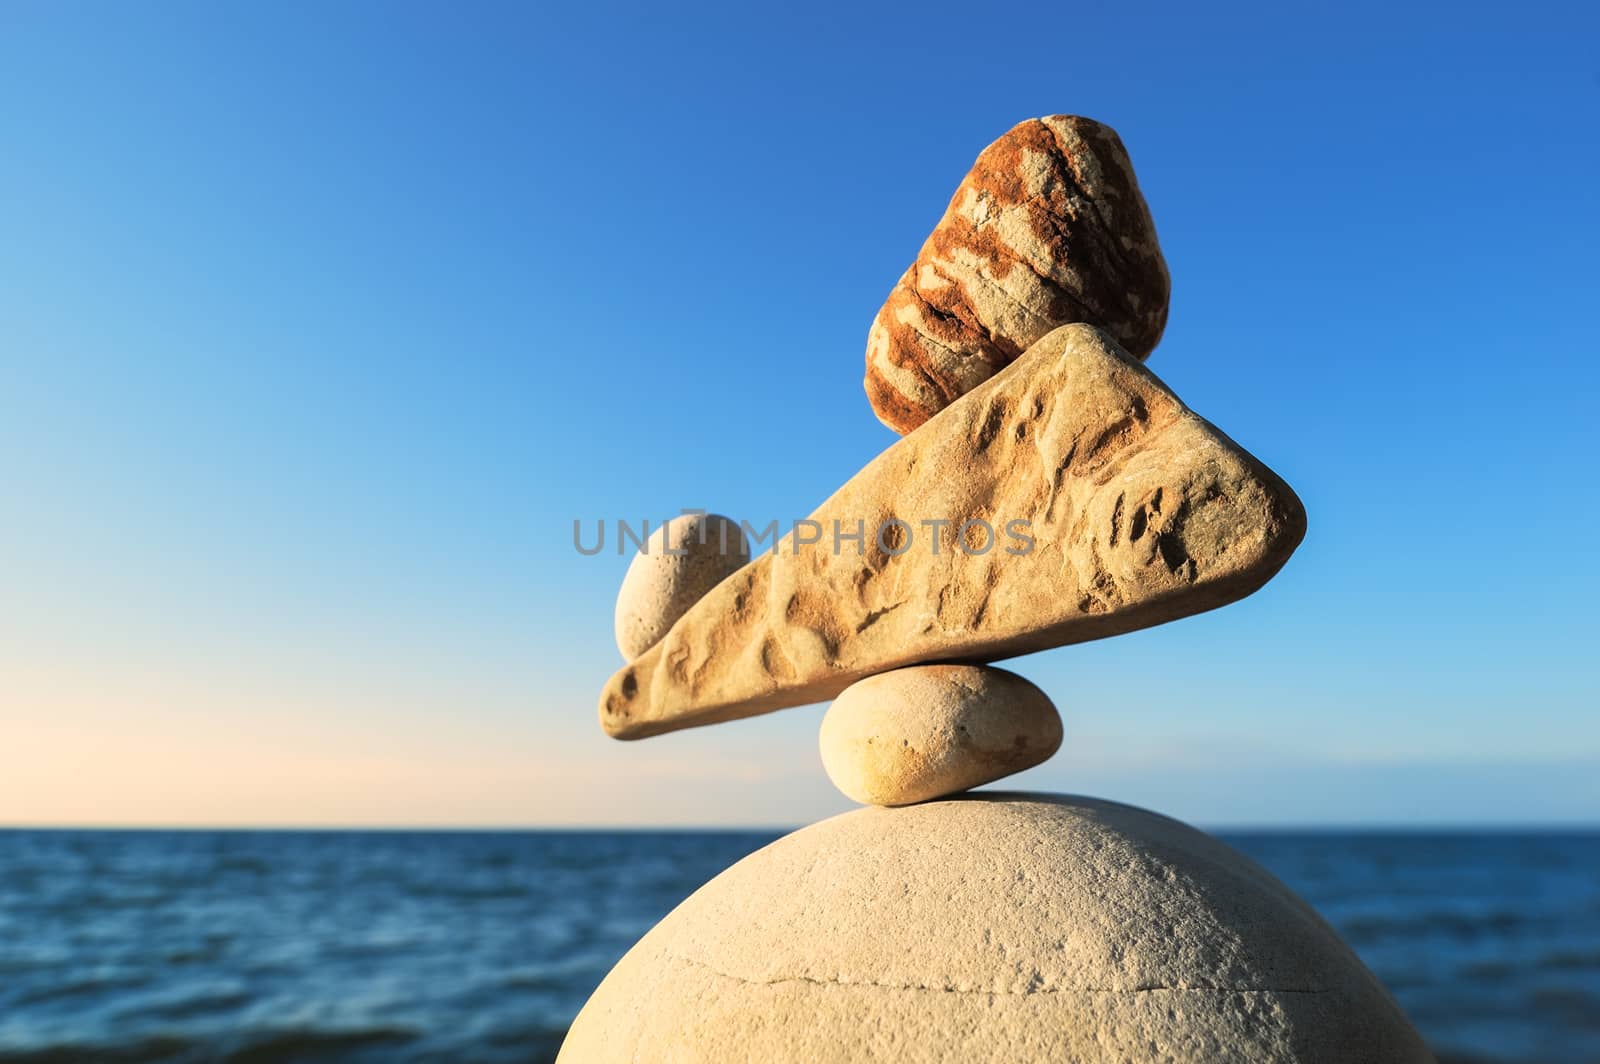 Well-balanced stack of pebbles on top of each other